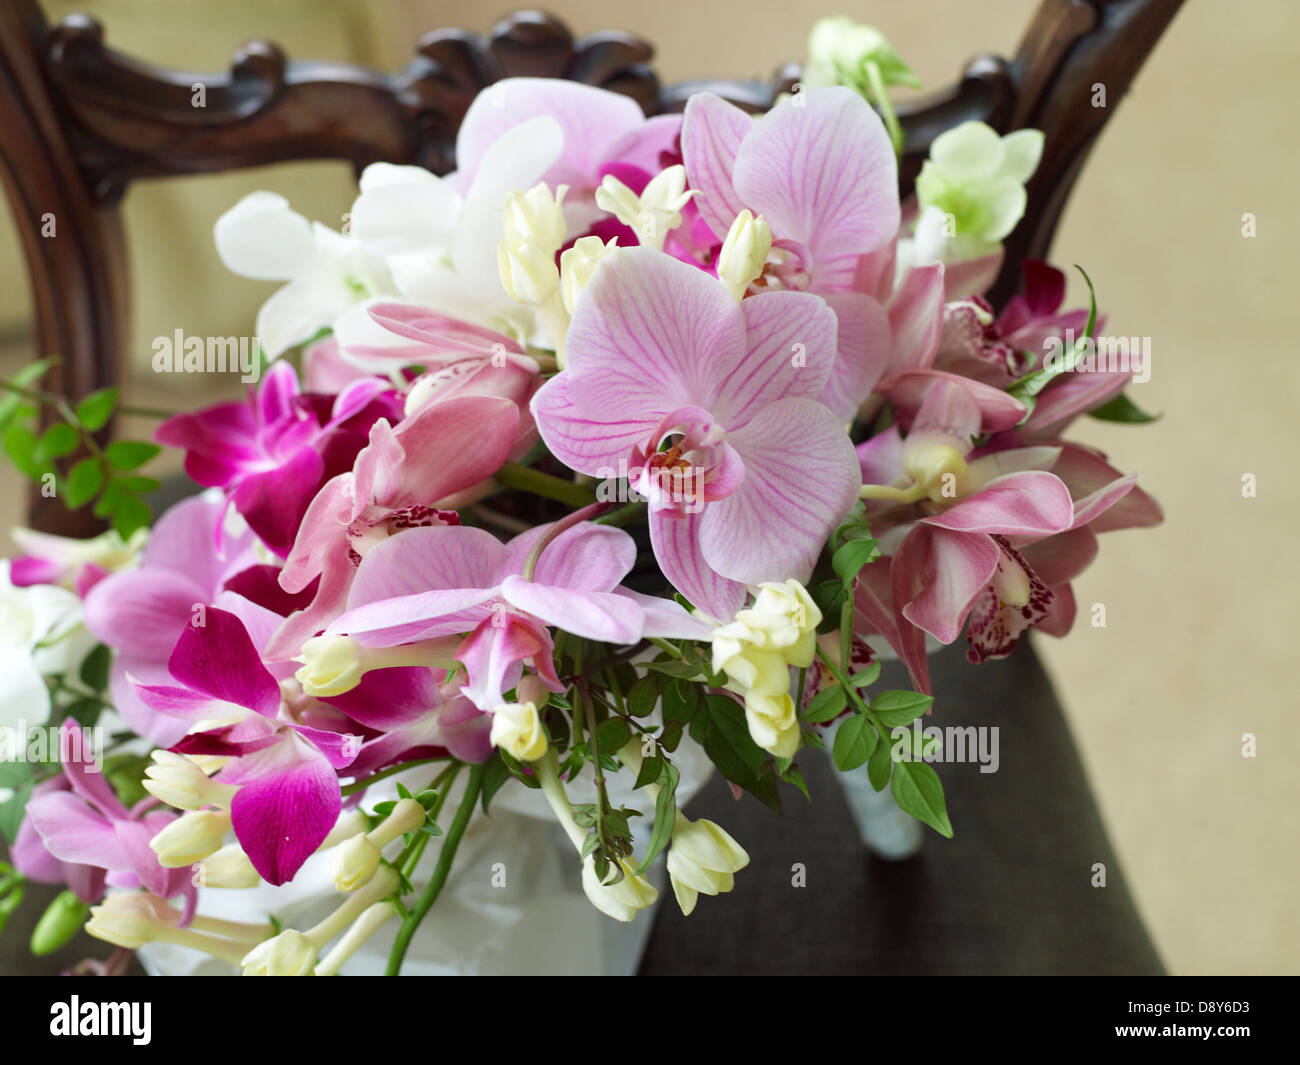 A spray of wedding flowers containing mixture of pink and white orchids, placed on a wooden table. Stock Photo